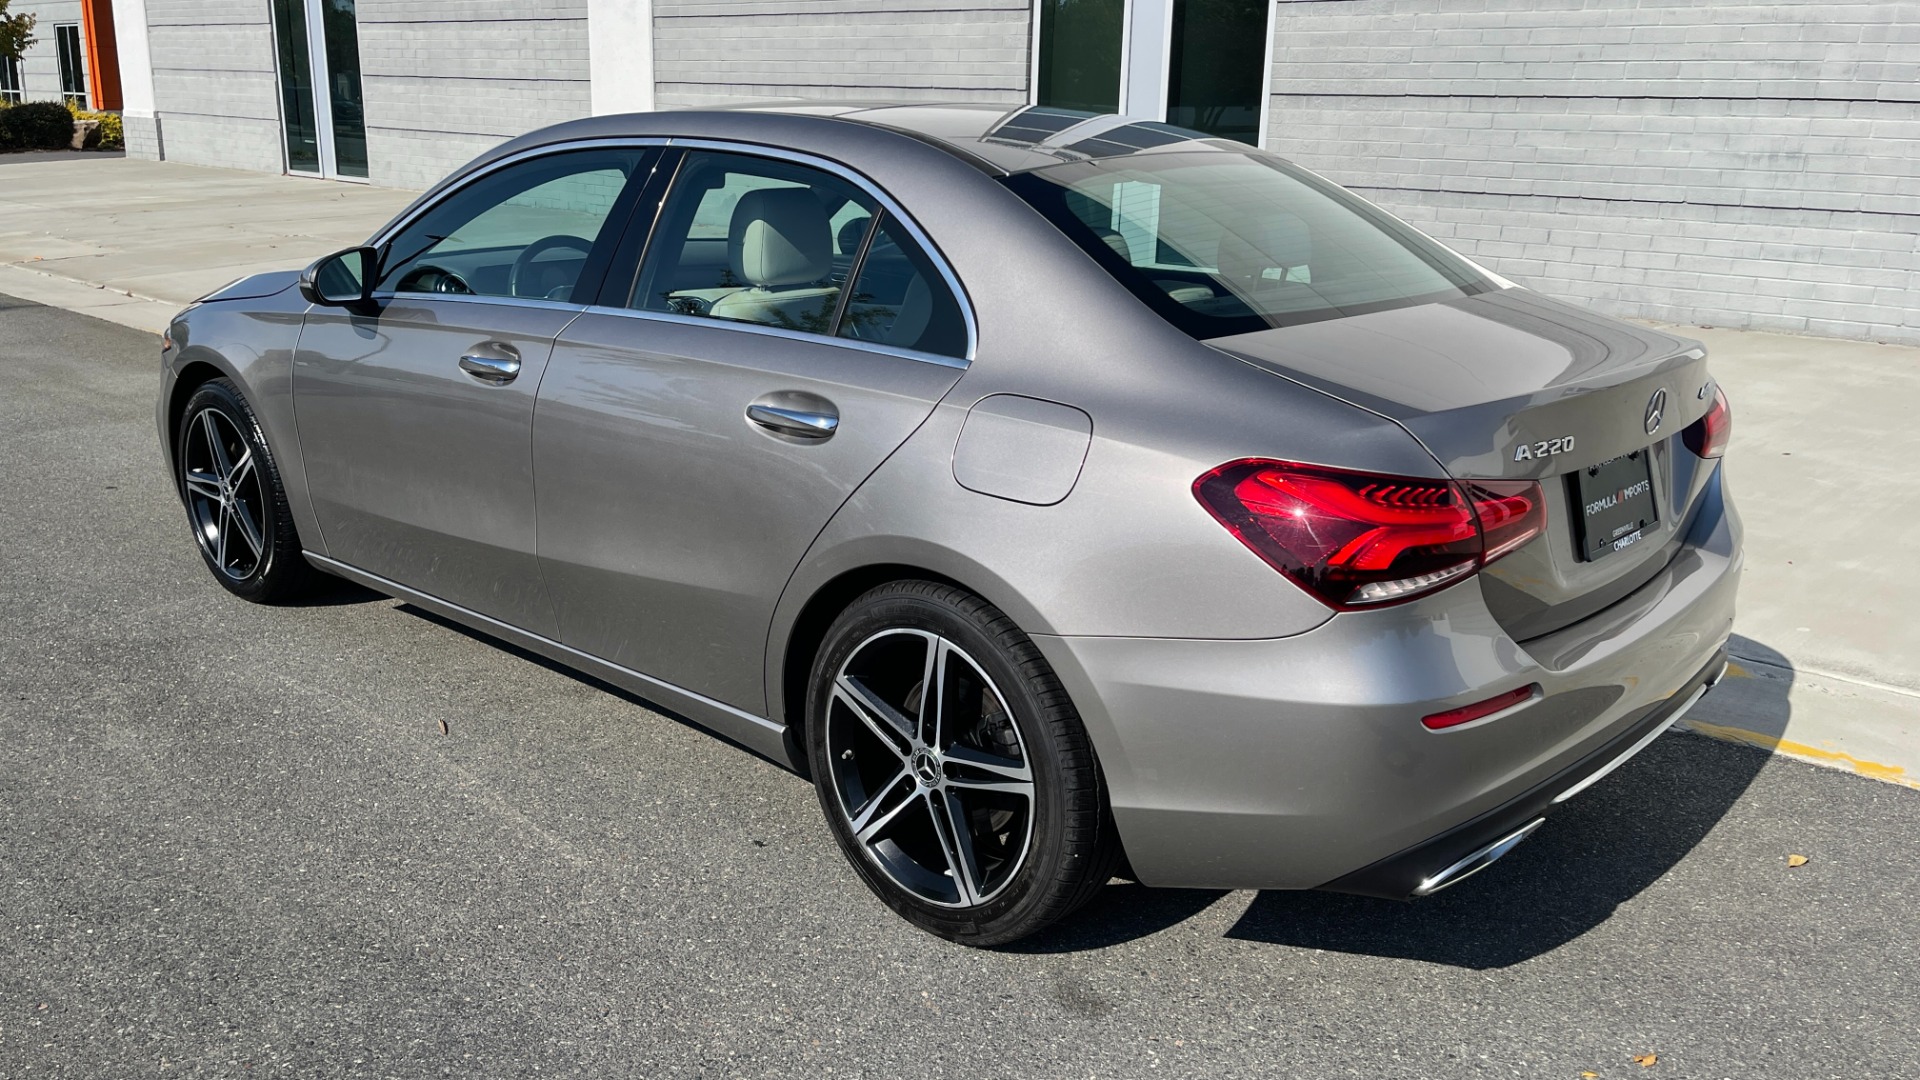 Used 2019 Mercedes-Benz A-Class A220 / PREMIUM / AMBIENT LIGHTING / BLIND SPOT / WIRELESS CHARGING for sale $30,599 at Formula Imports in Charlotte NC 28227 7